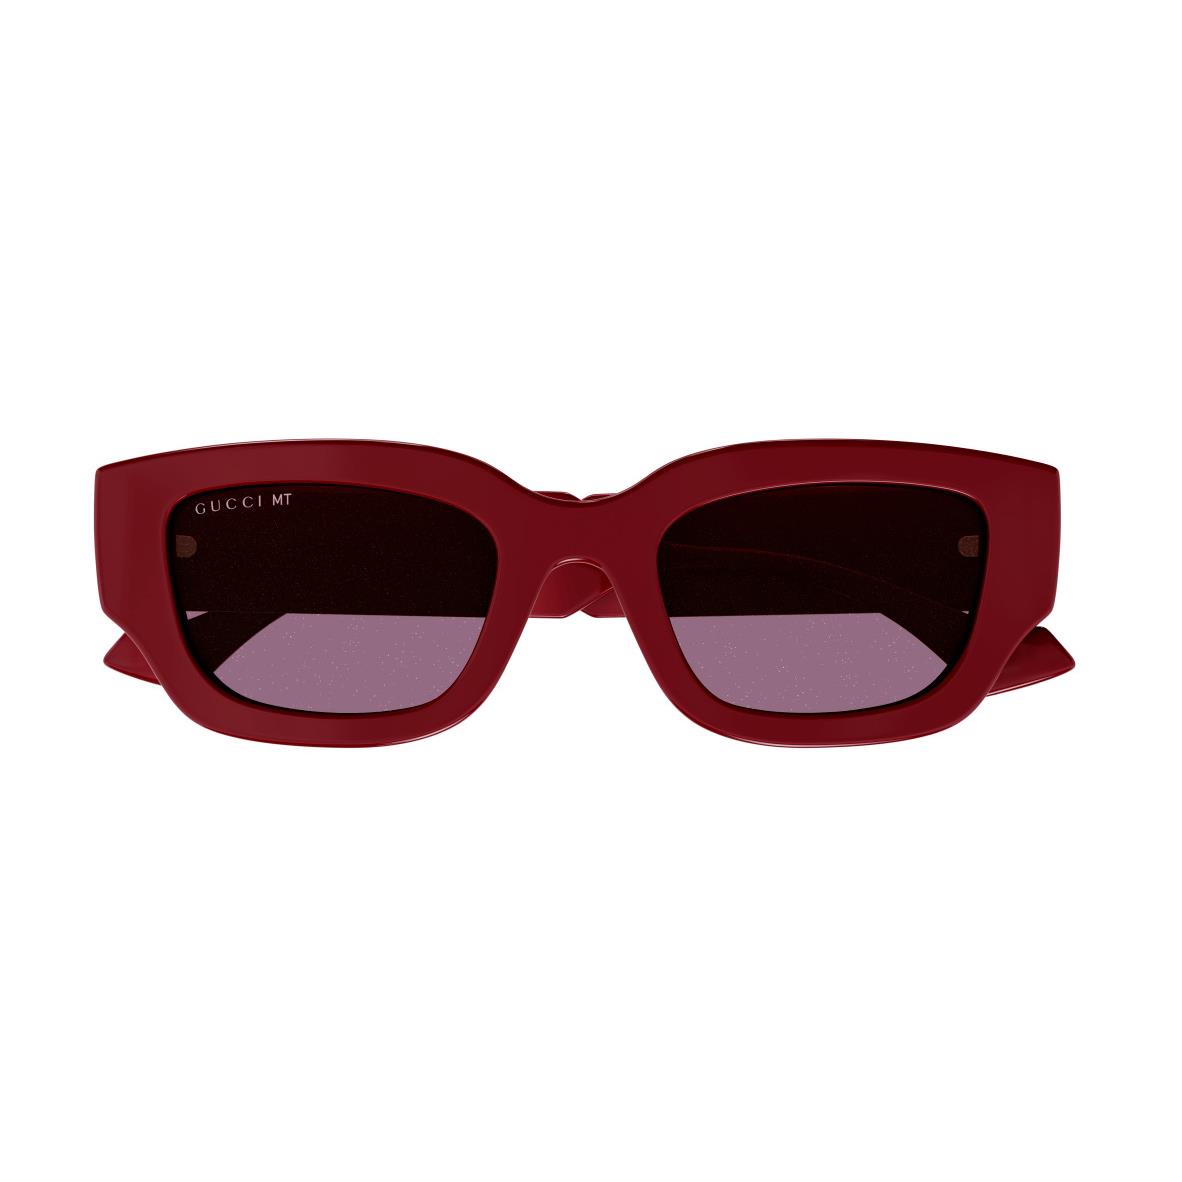 Gucci Sunglasses GG1558SK 005 Red Frame Pink Gradient Lens 51MM